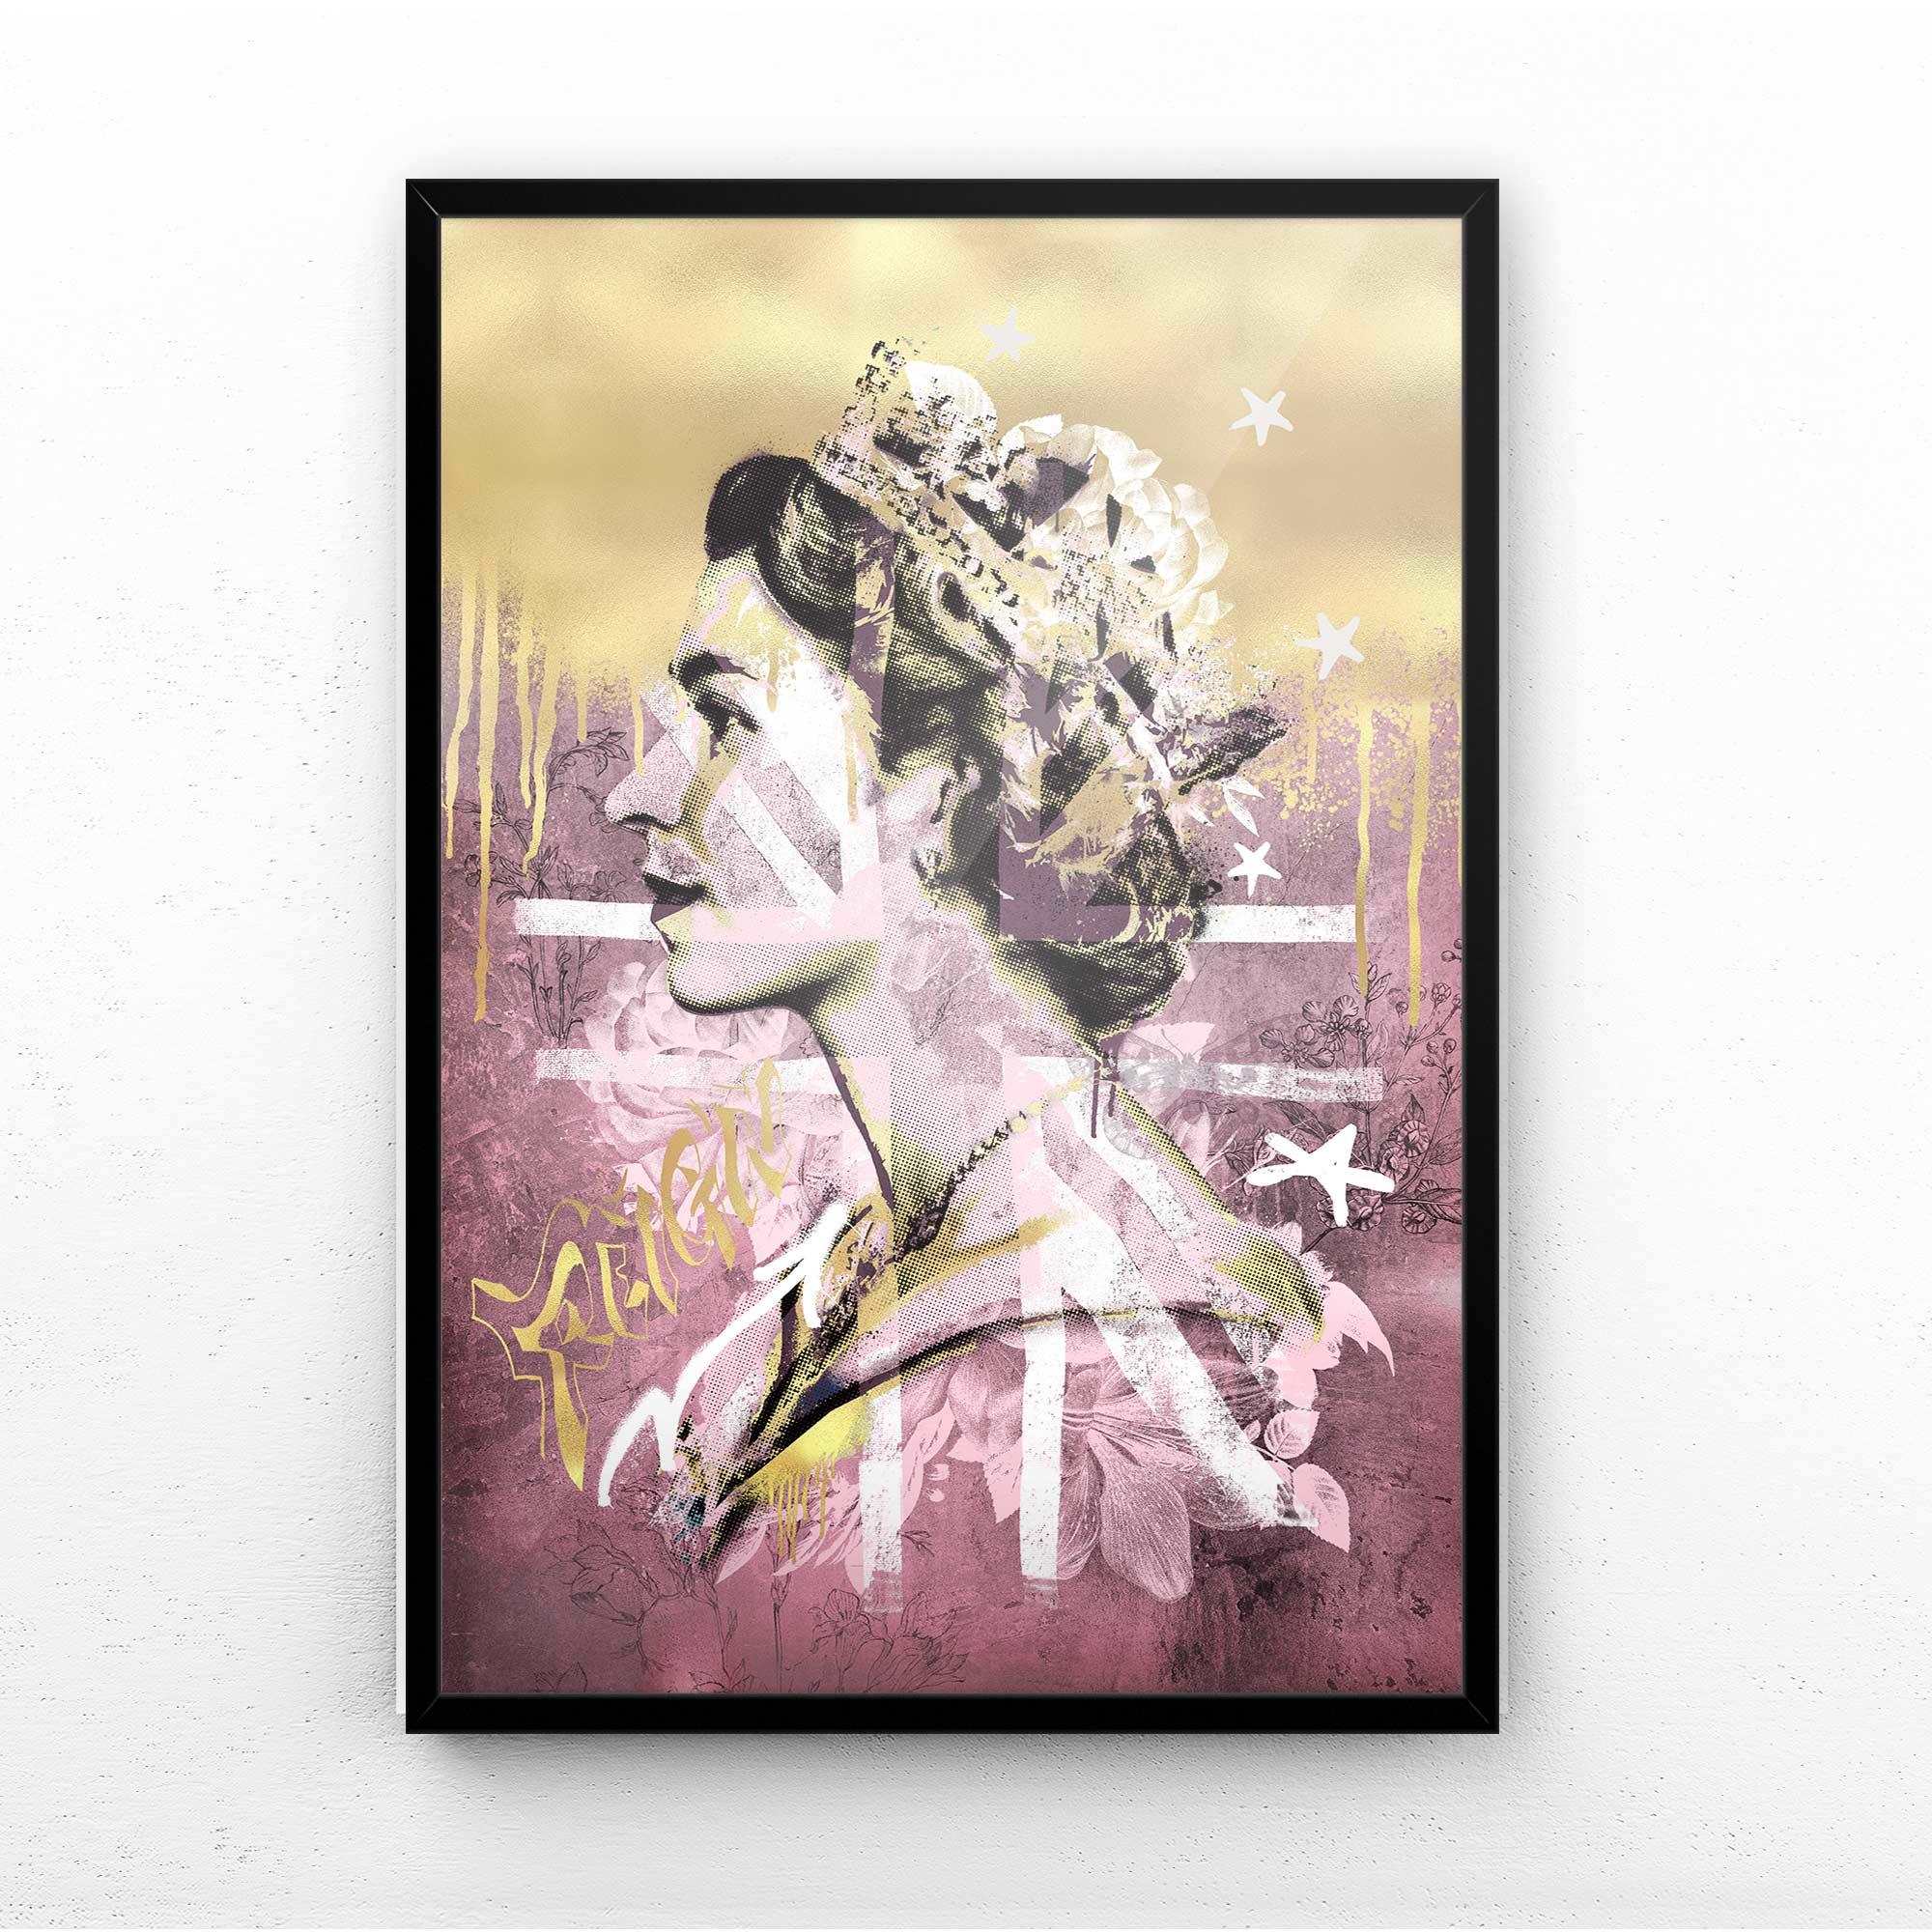 REIGN OVER ME ROUGE / GOLD PRINT - Afterhours Gallery 